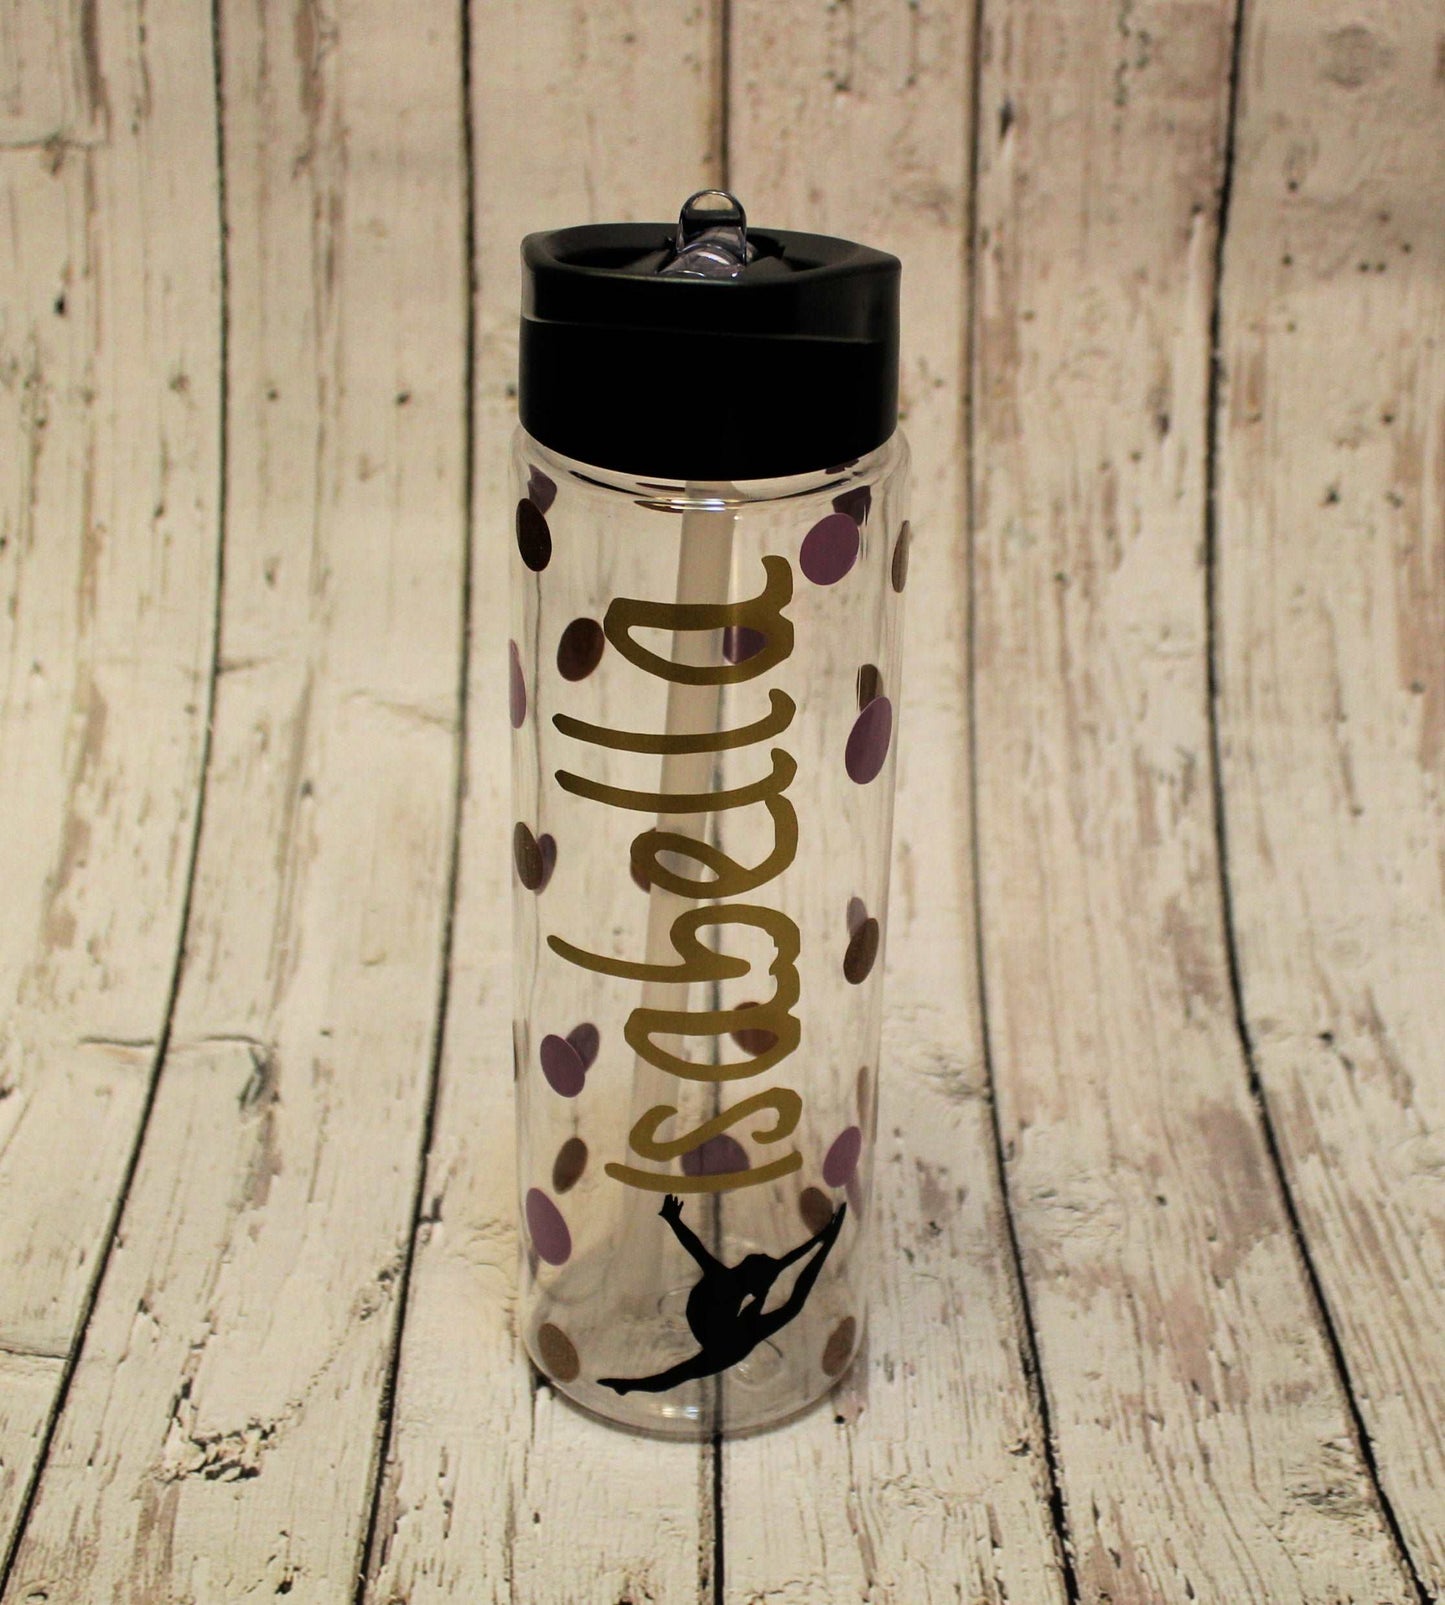 Gymnast Plastic Water Bottle freeshipping - Be Vocal Designs